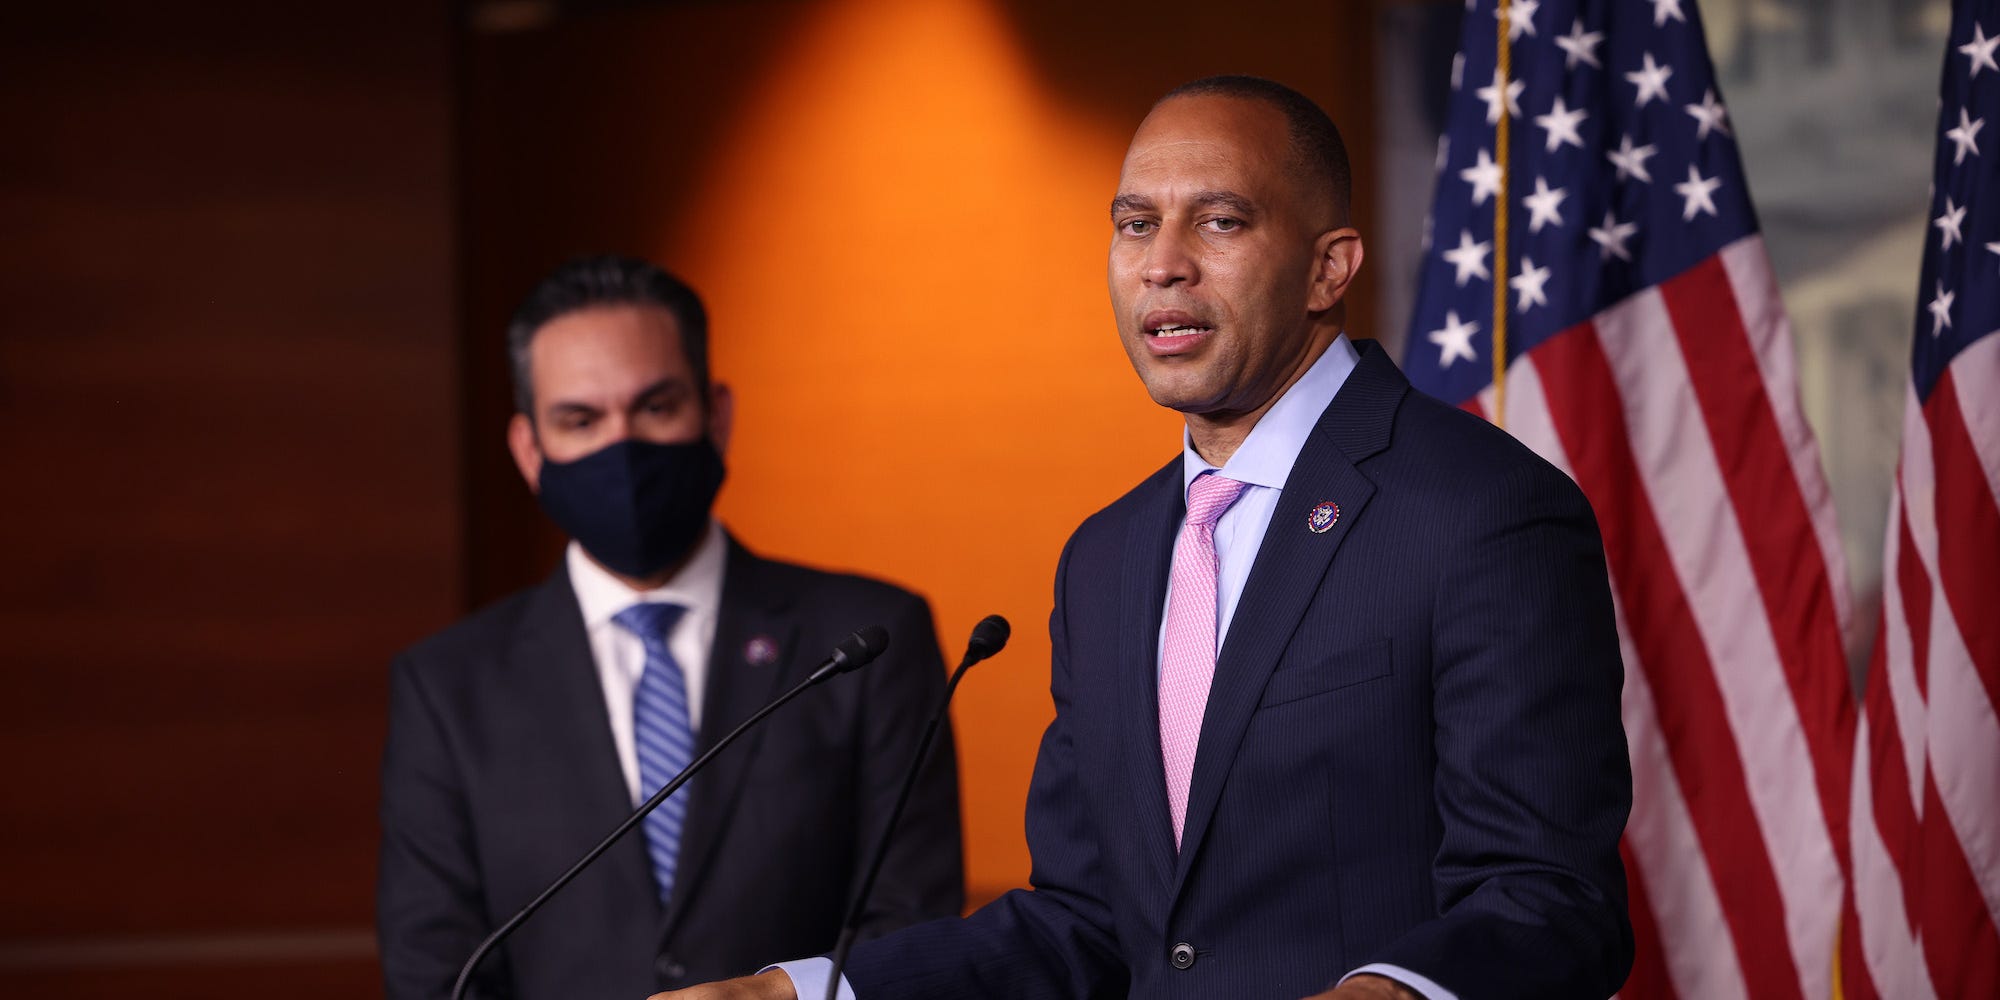 Democratic Caucus Chairman Rep. Hakeem Jeffries of New York and Vice Chairman Rep. Pete Aguilar of California hold a news conference at the US Capitol on September 21, 2021.